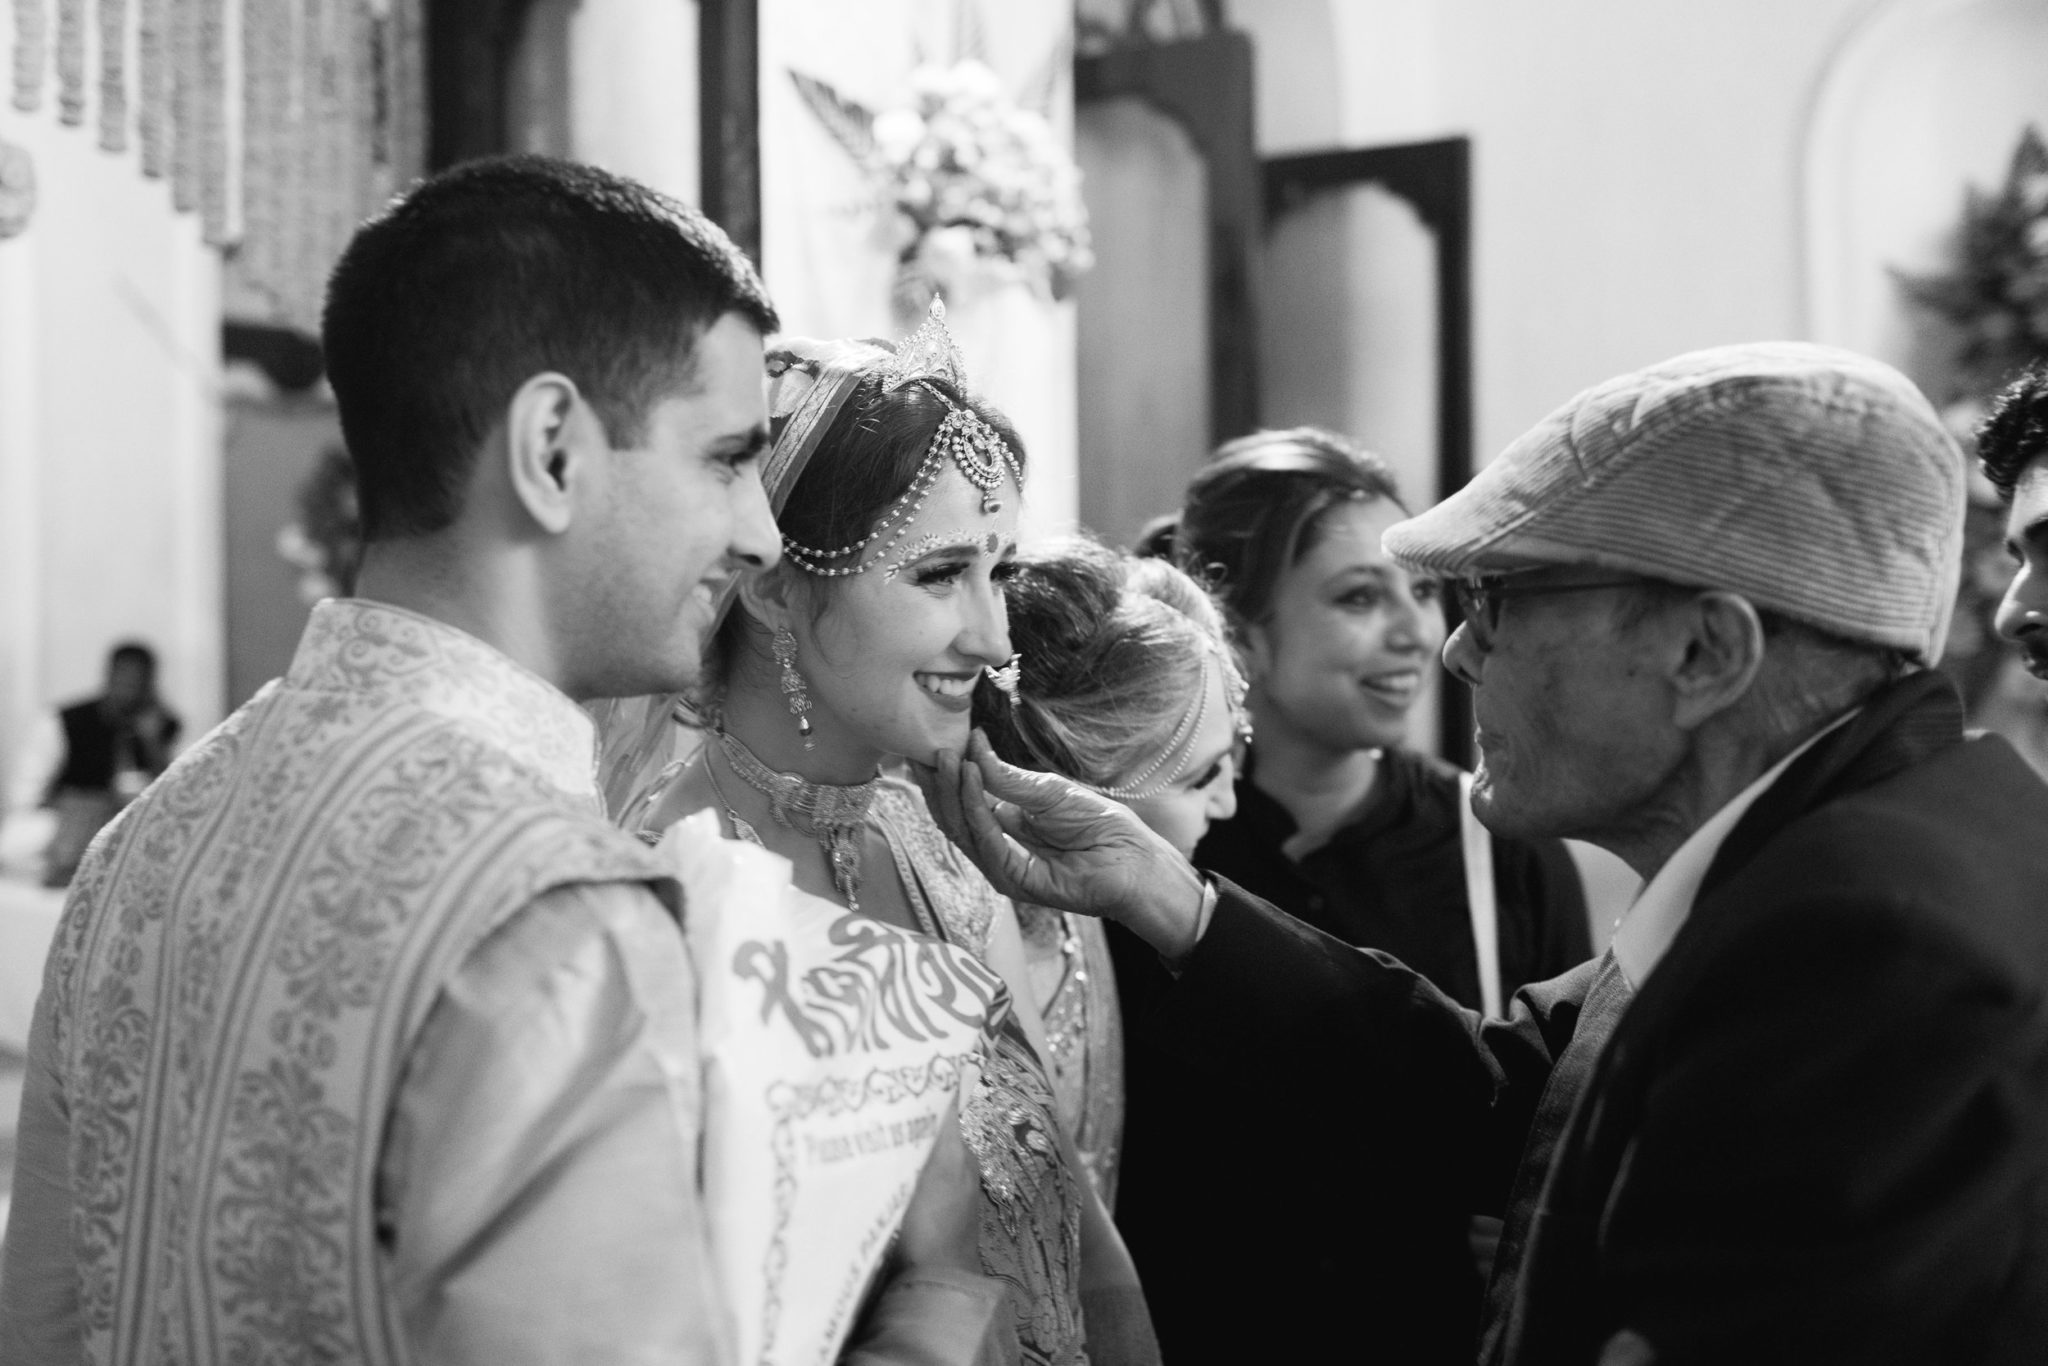 An elderly man greets the bride and groom, who are dressed in traditional Indian wedding clothes, and reaches out to touch the bride's face in a photo by Betty Clicker